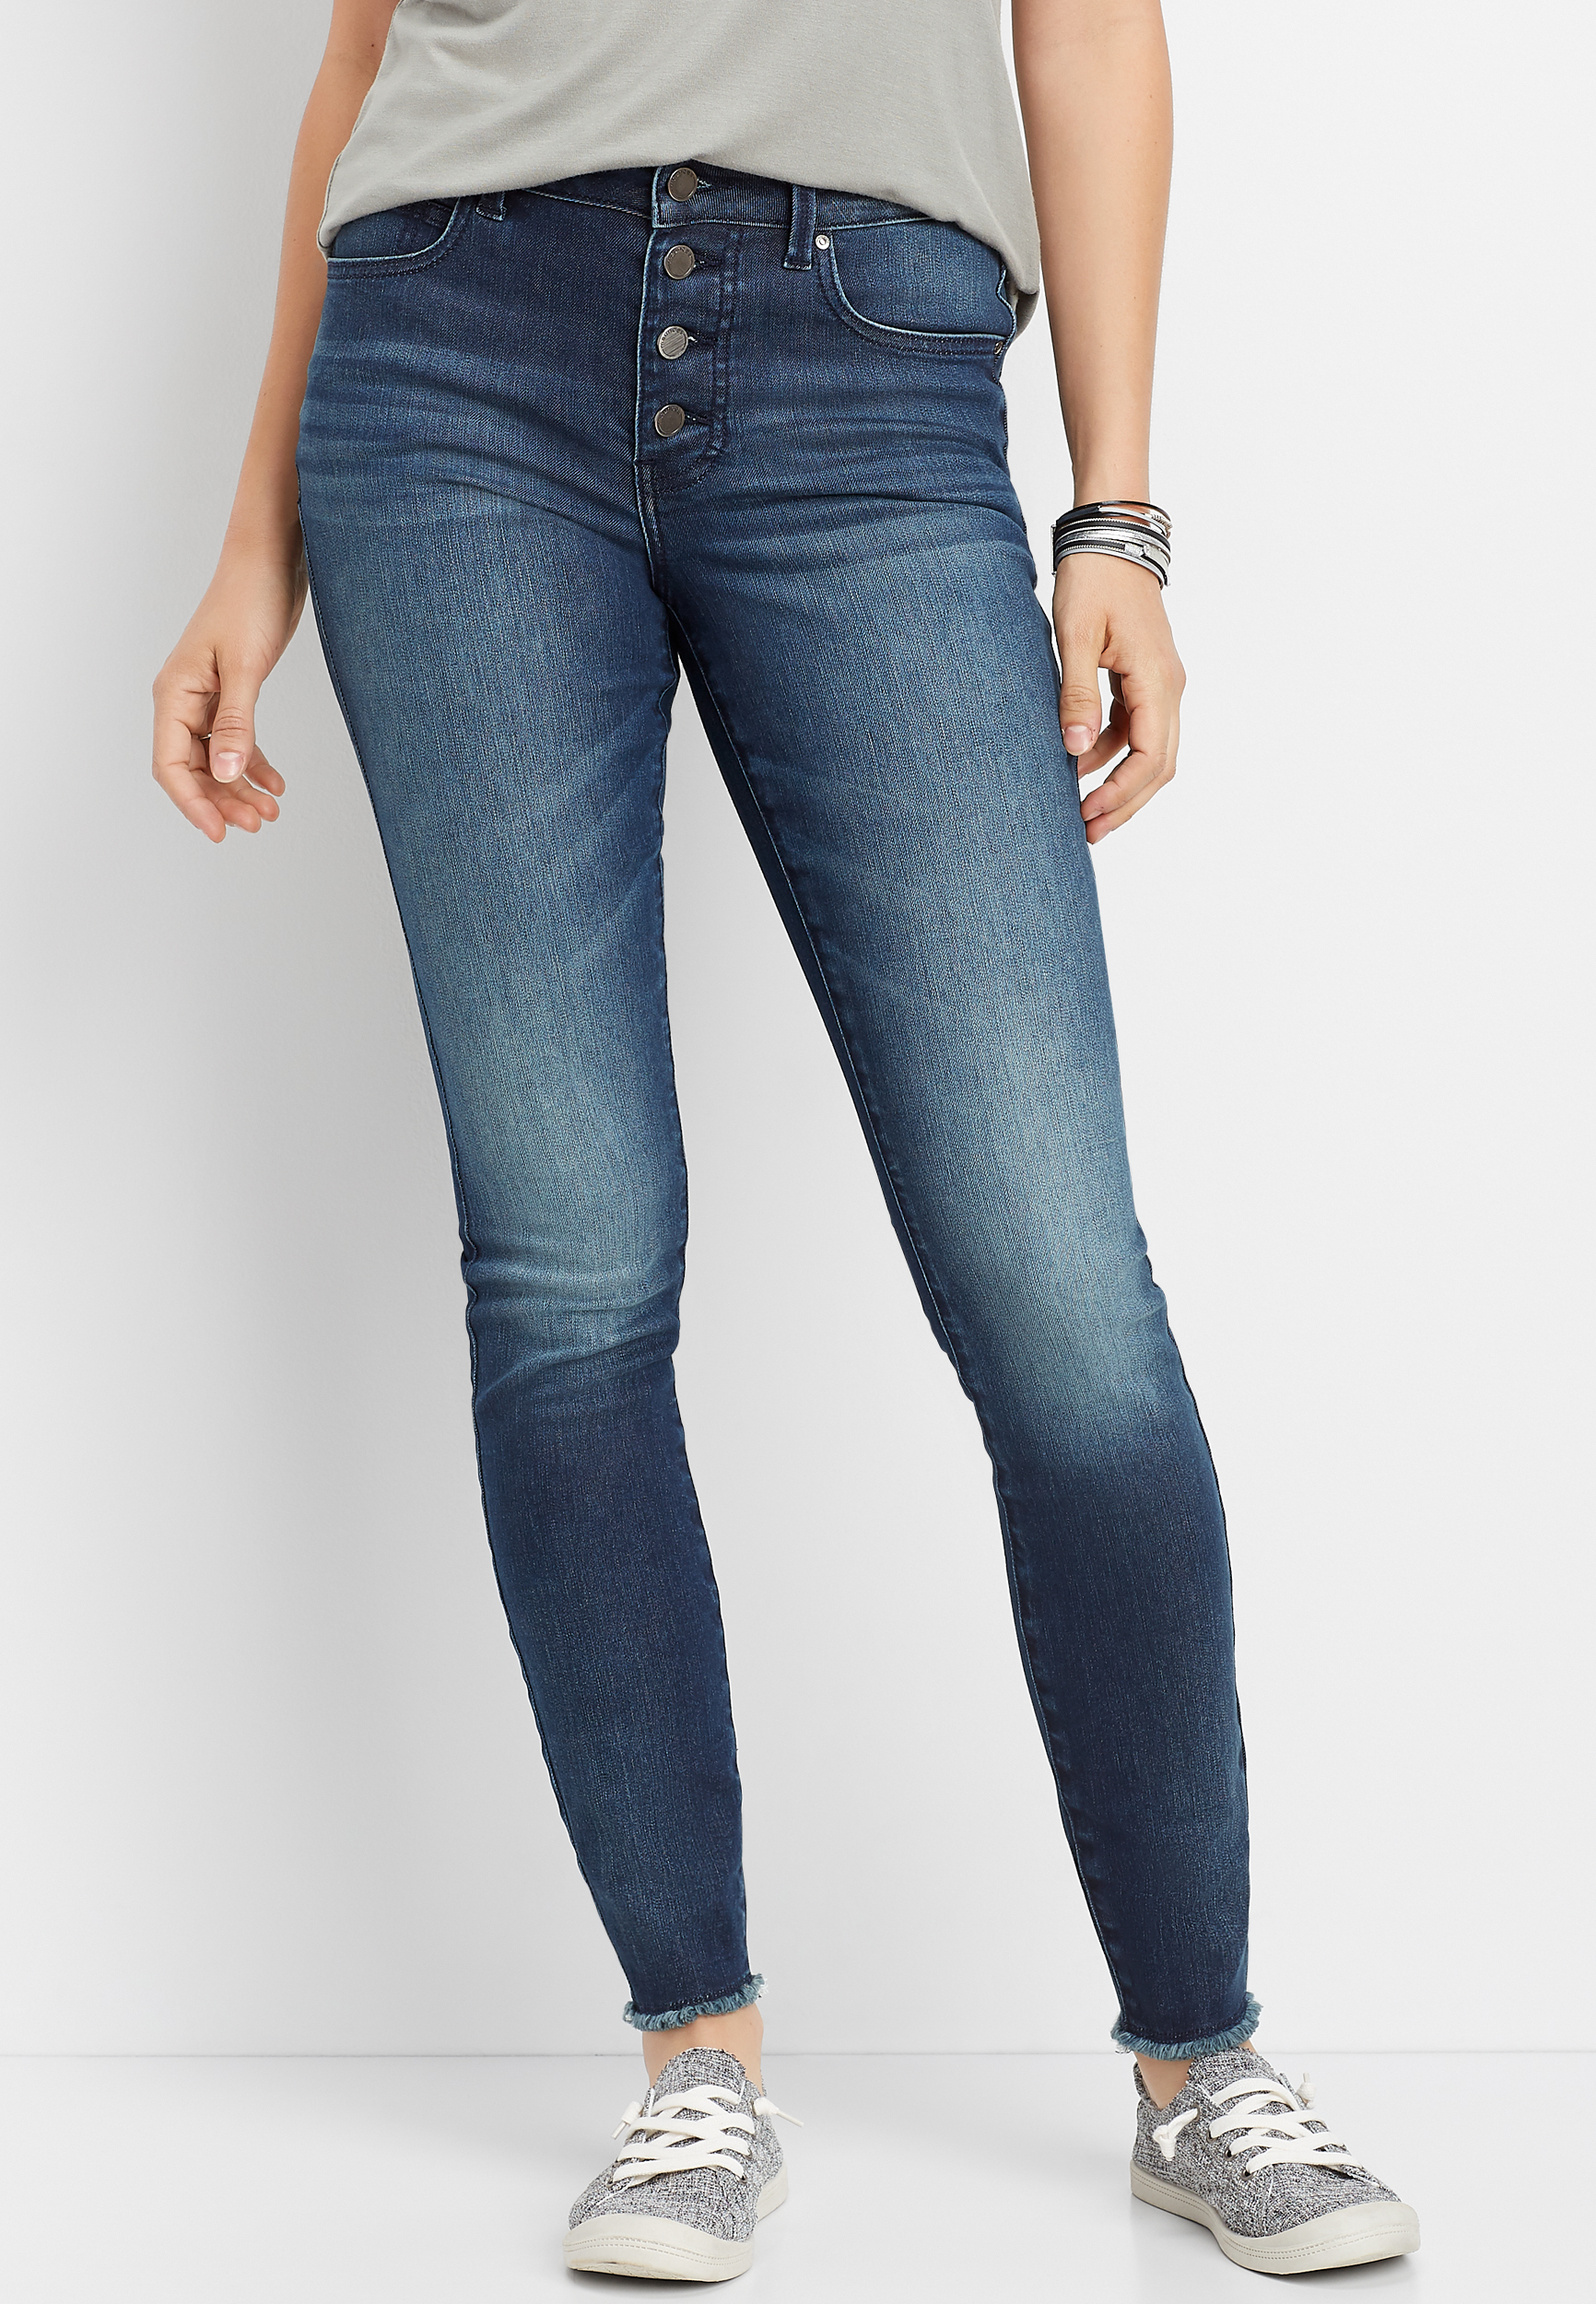 Everflex™ High Rise Button Fly Stretch Super Skinny Jean | maurices